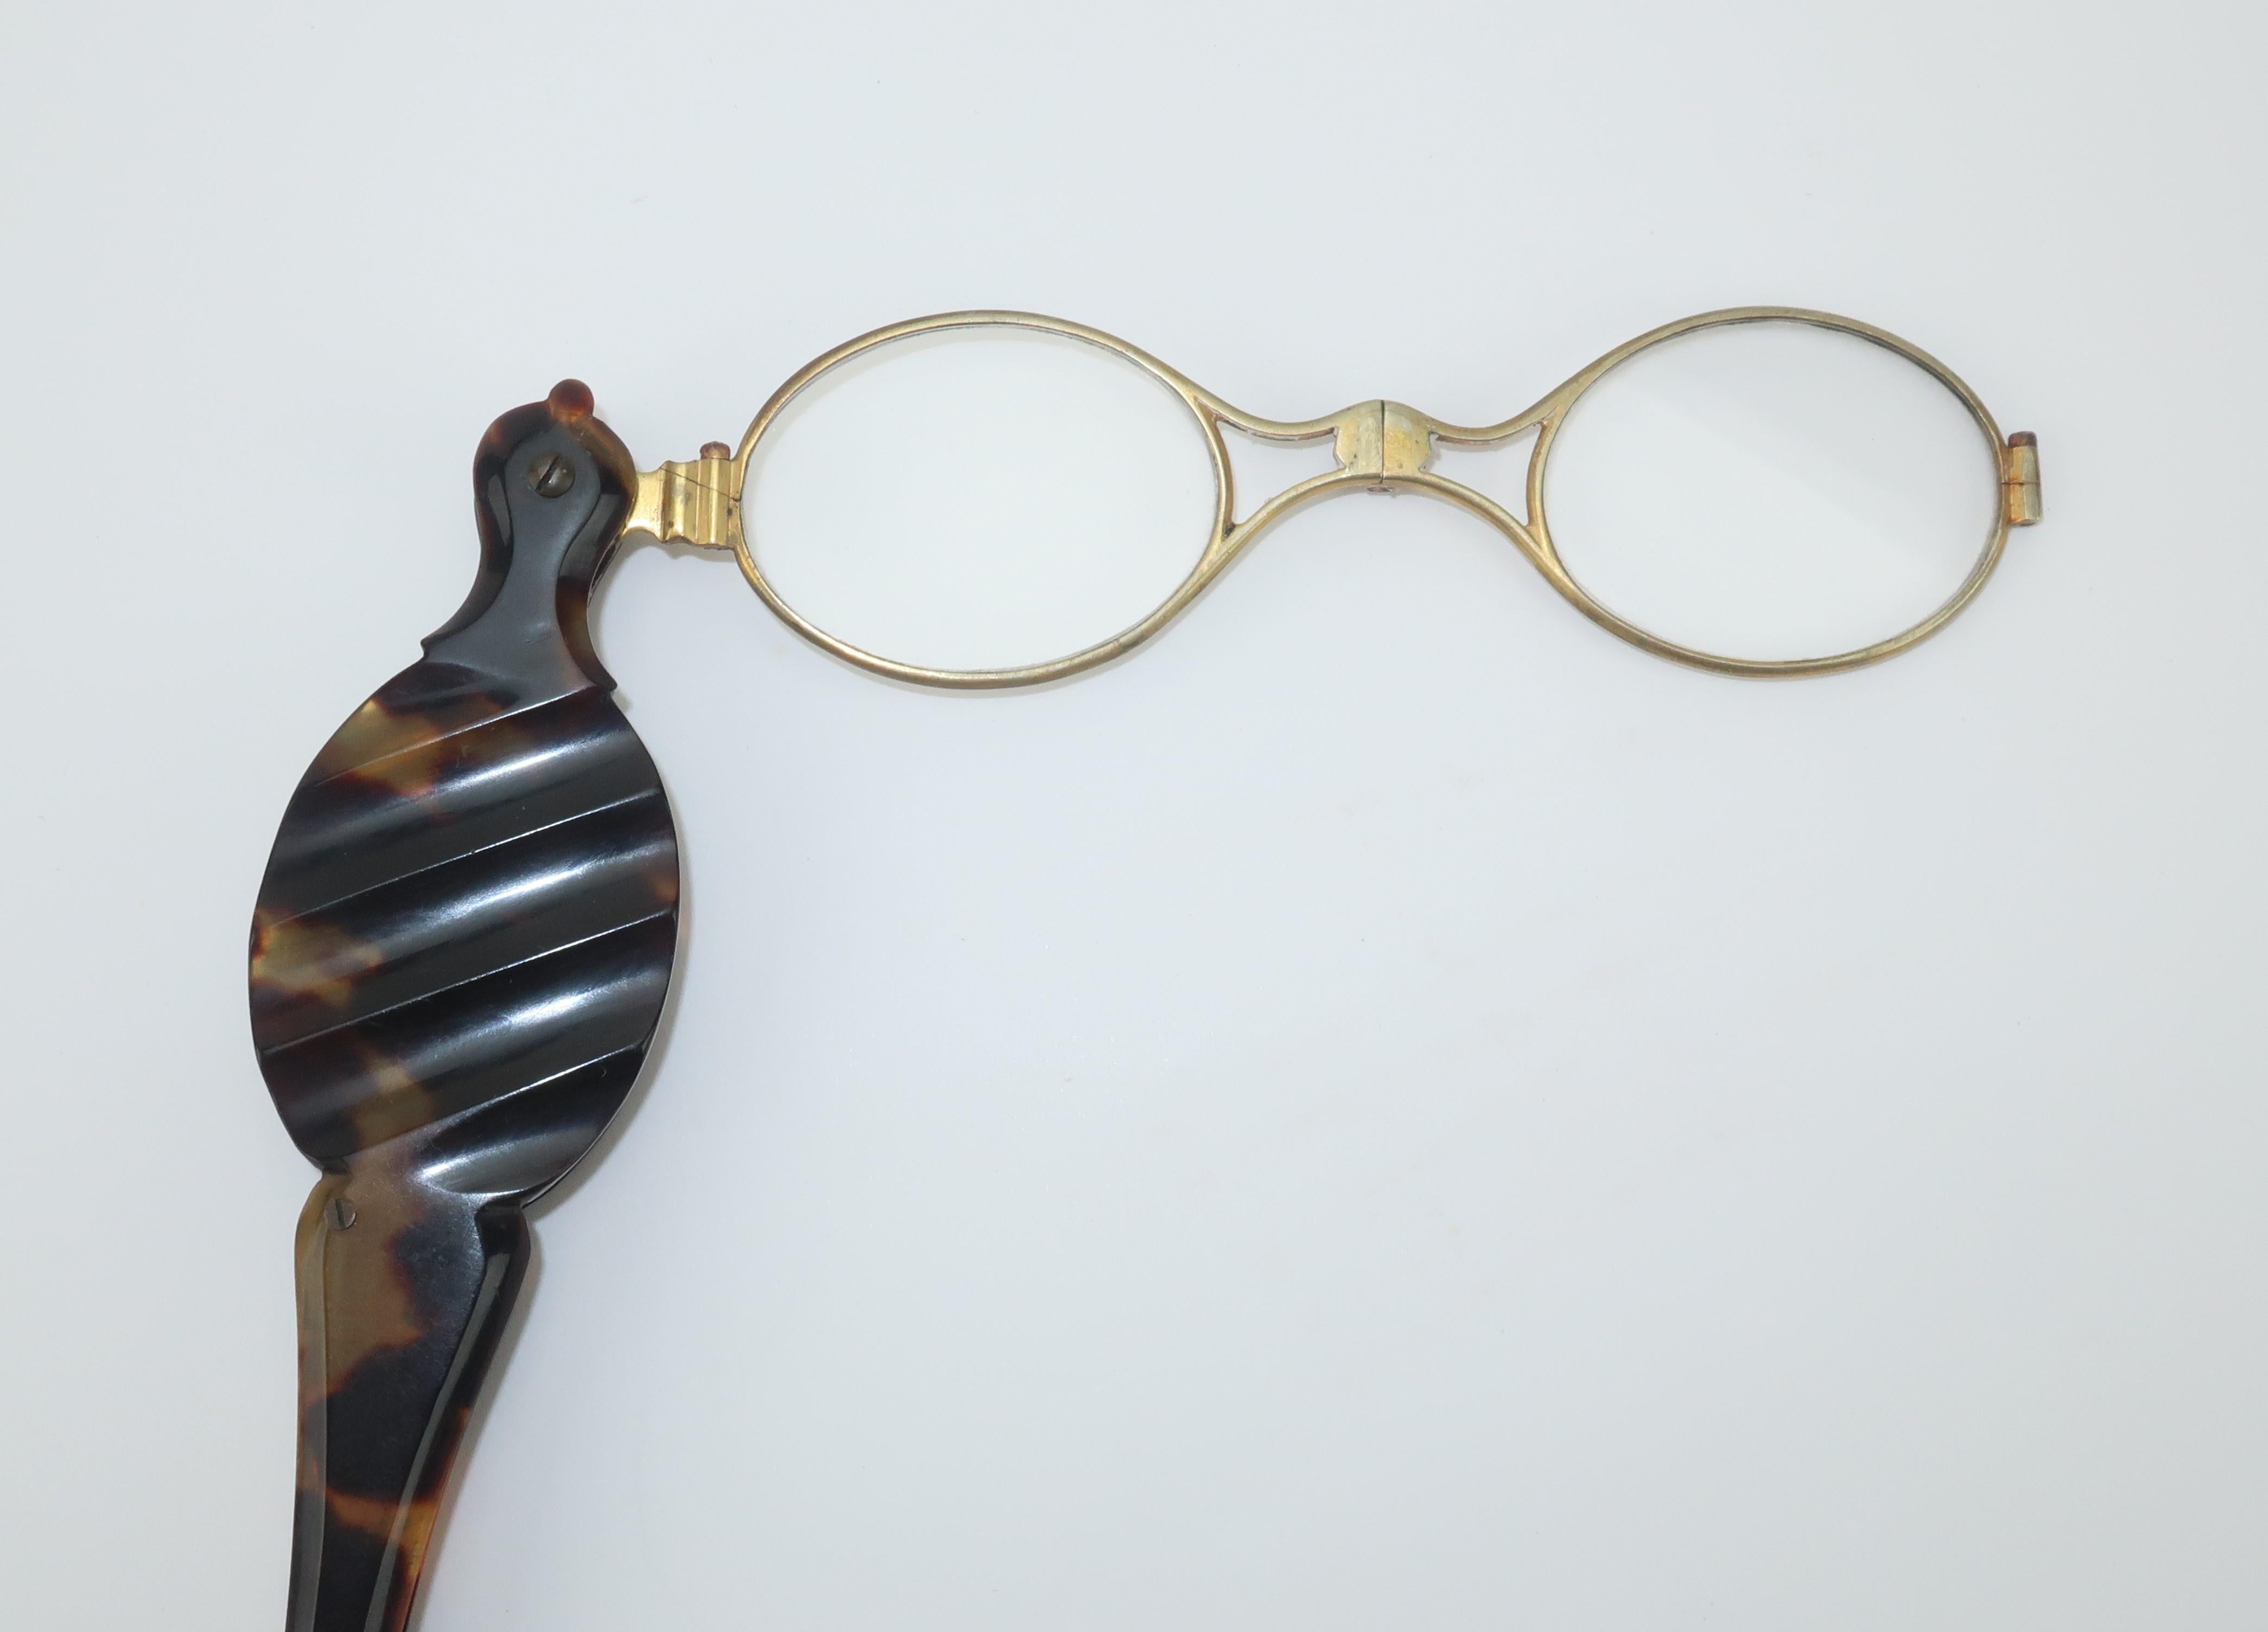 Late 19th Century imitation tortoise lorgnette magnifier glasses with a spring loaded mechanism for easy folding and storage.  The gold tone metal frames fold open by depressing a button on the handle shaft, shown in photograph 6.  A ring at the end